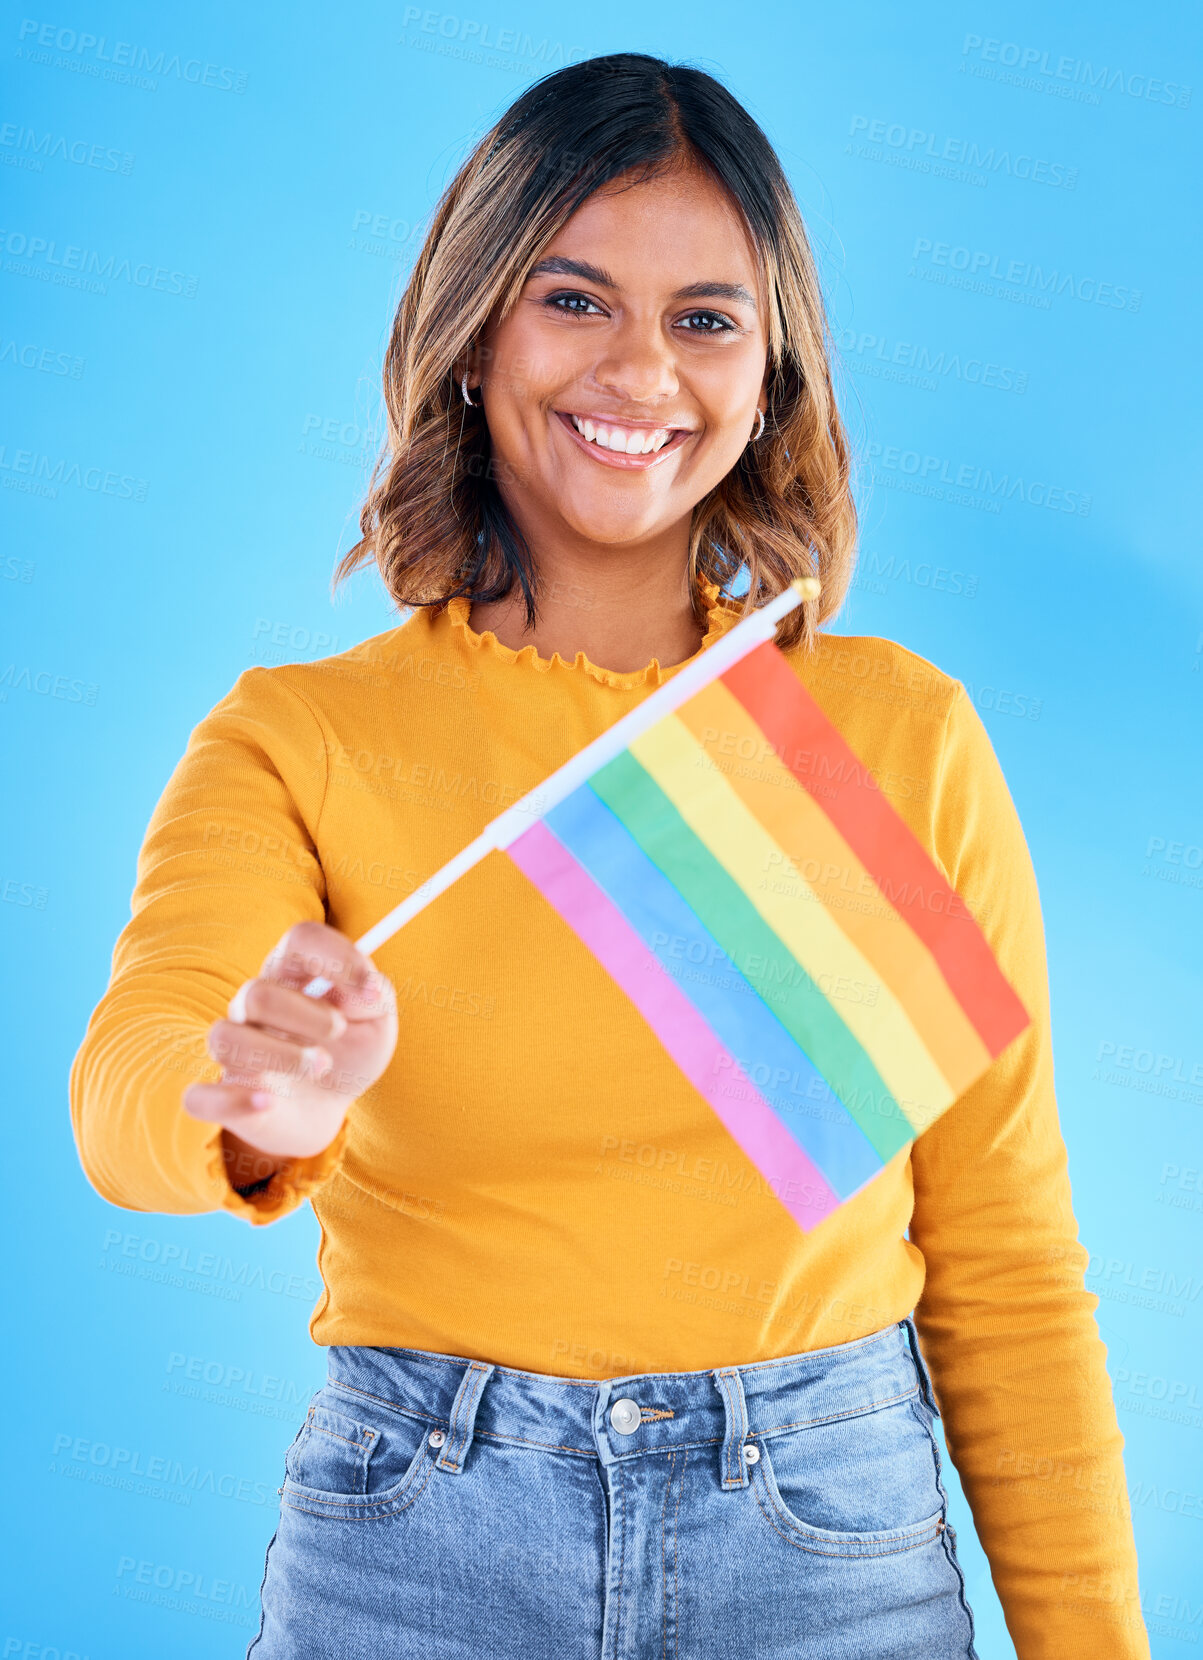 Buy stock photo Portrait, flag and gay pride with a woman on a blue background in studio feeling proud of her lgbt status. Smile, freedom and equality with a happy young female holding a symbol of inclusion